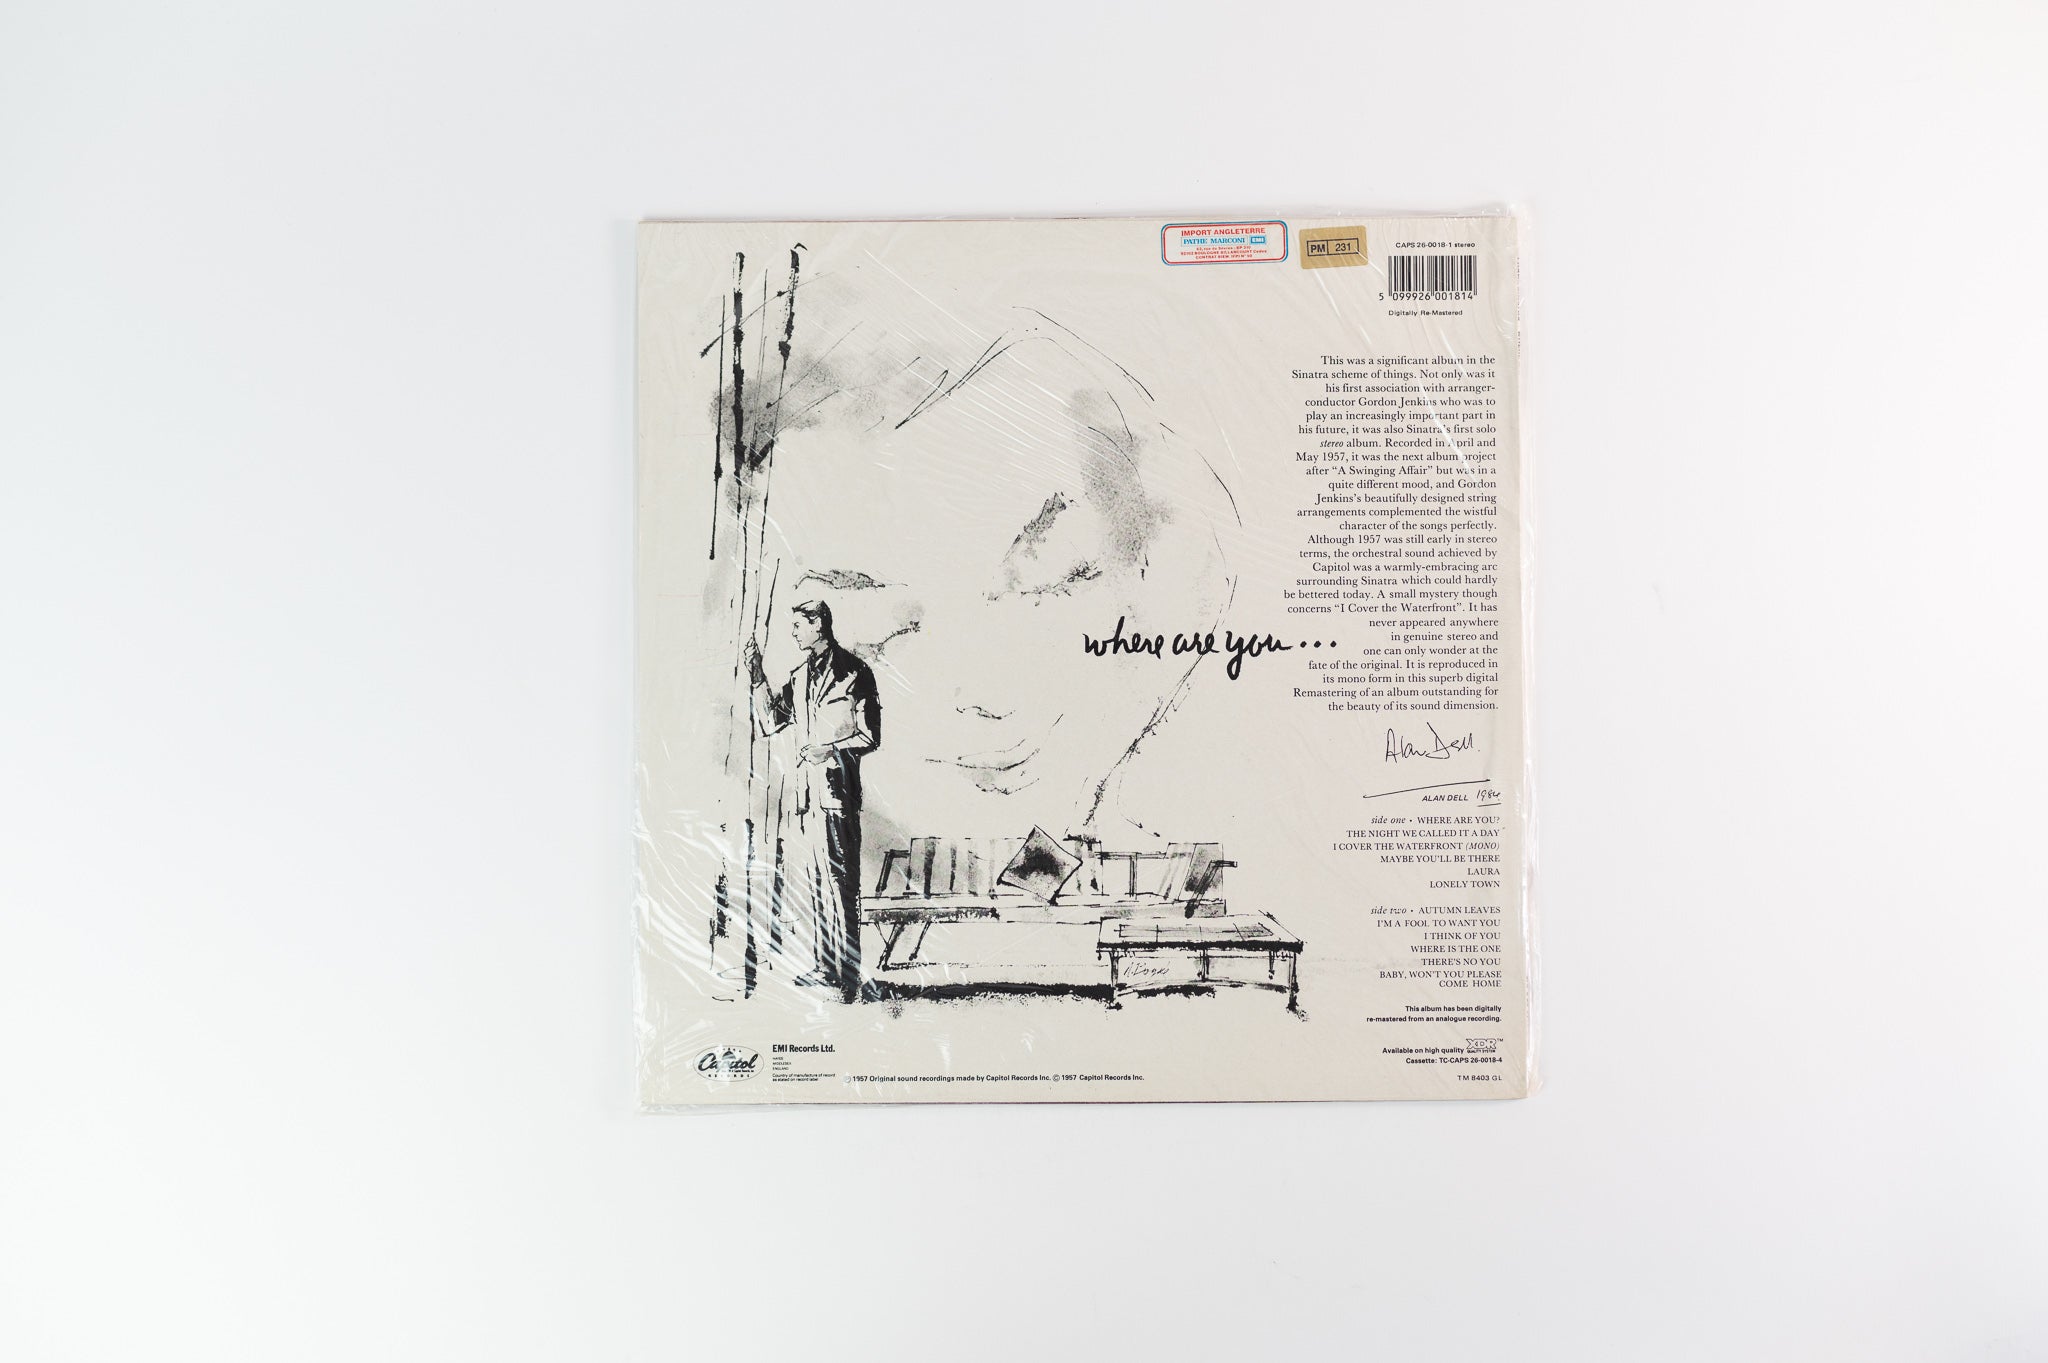 Frank Sinatra - Where Are You? on Capitol UK Remastered Reissue